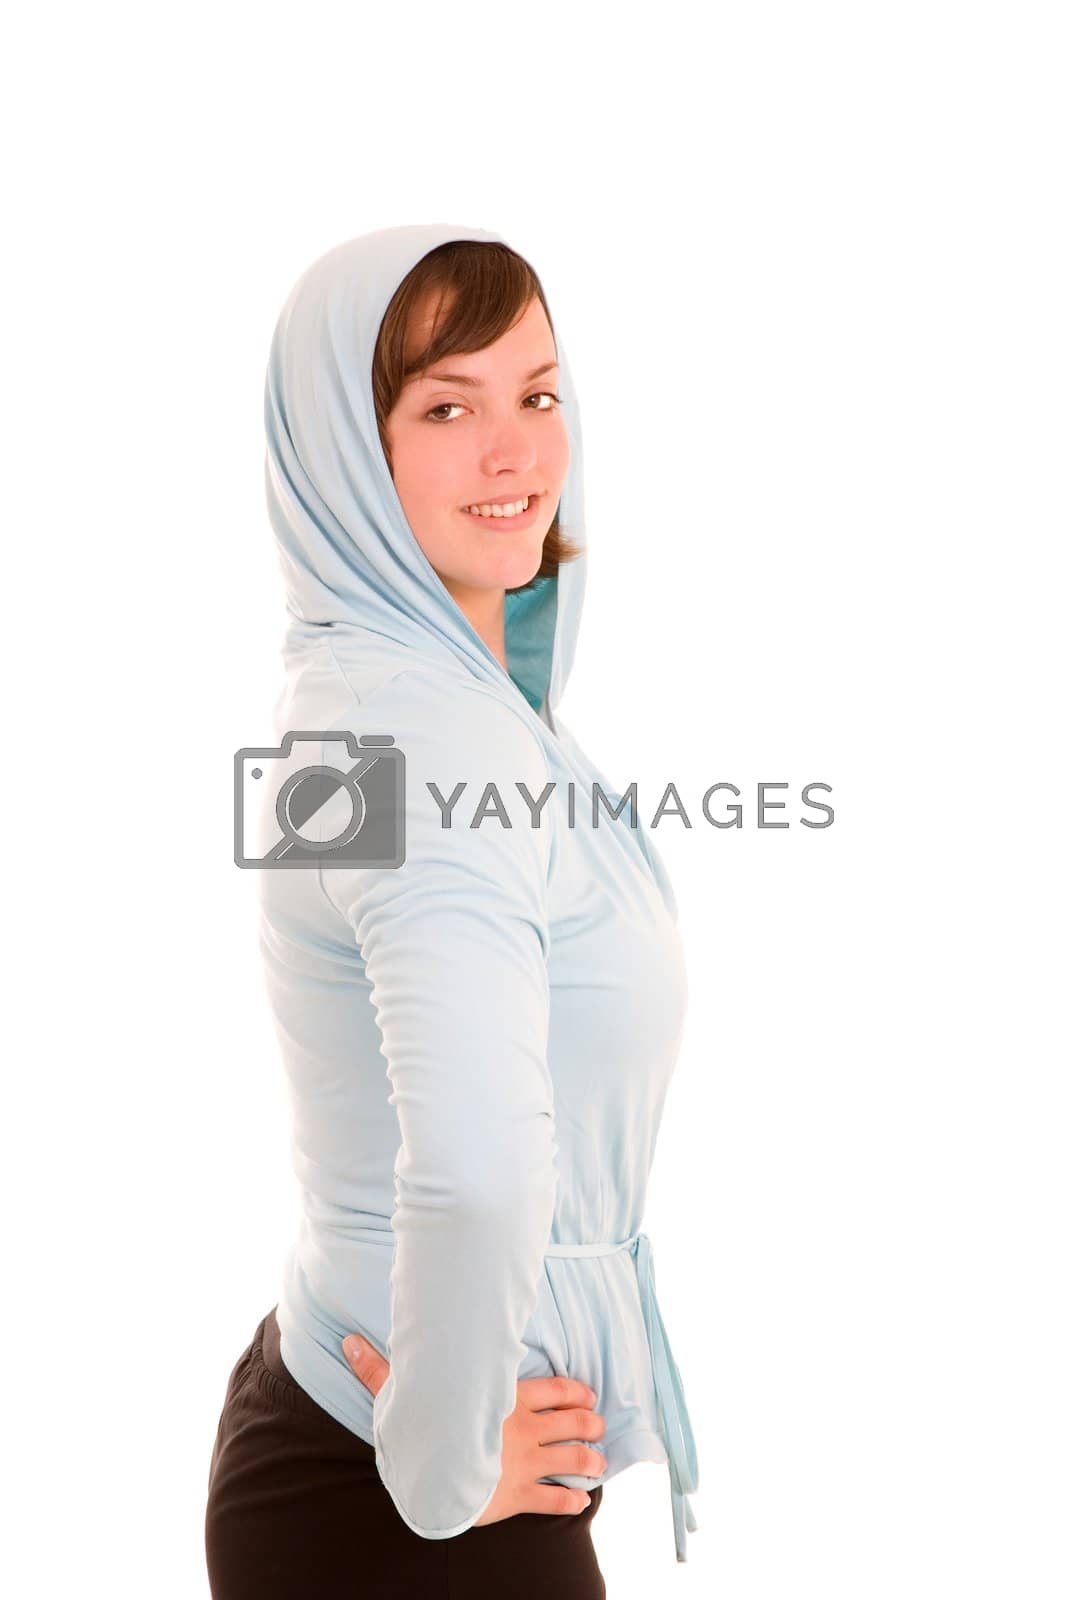 Royalty free image of Sensual sports clothing by Fotosmurf